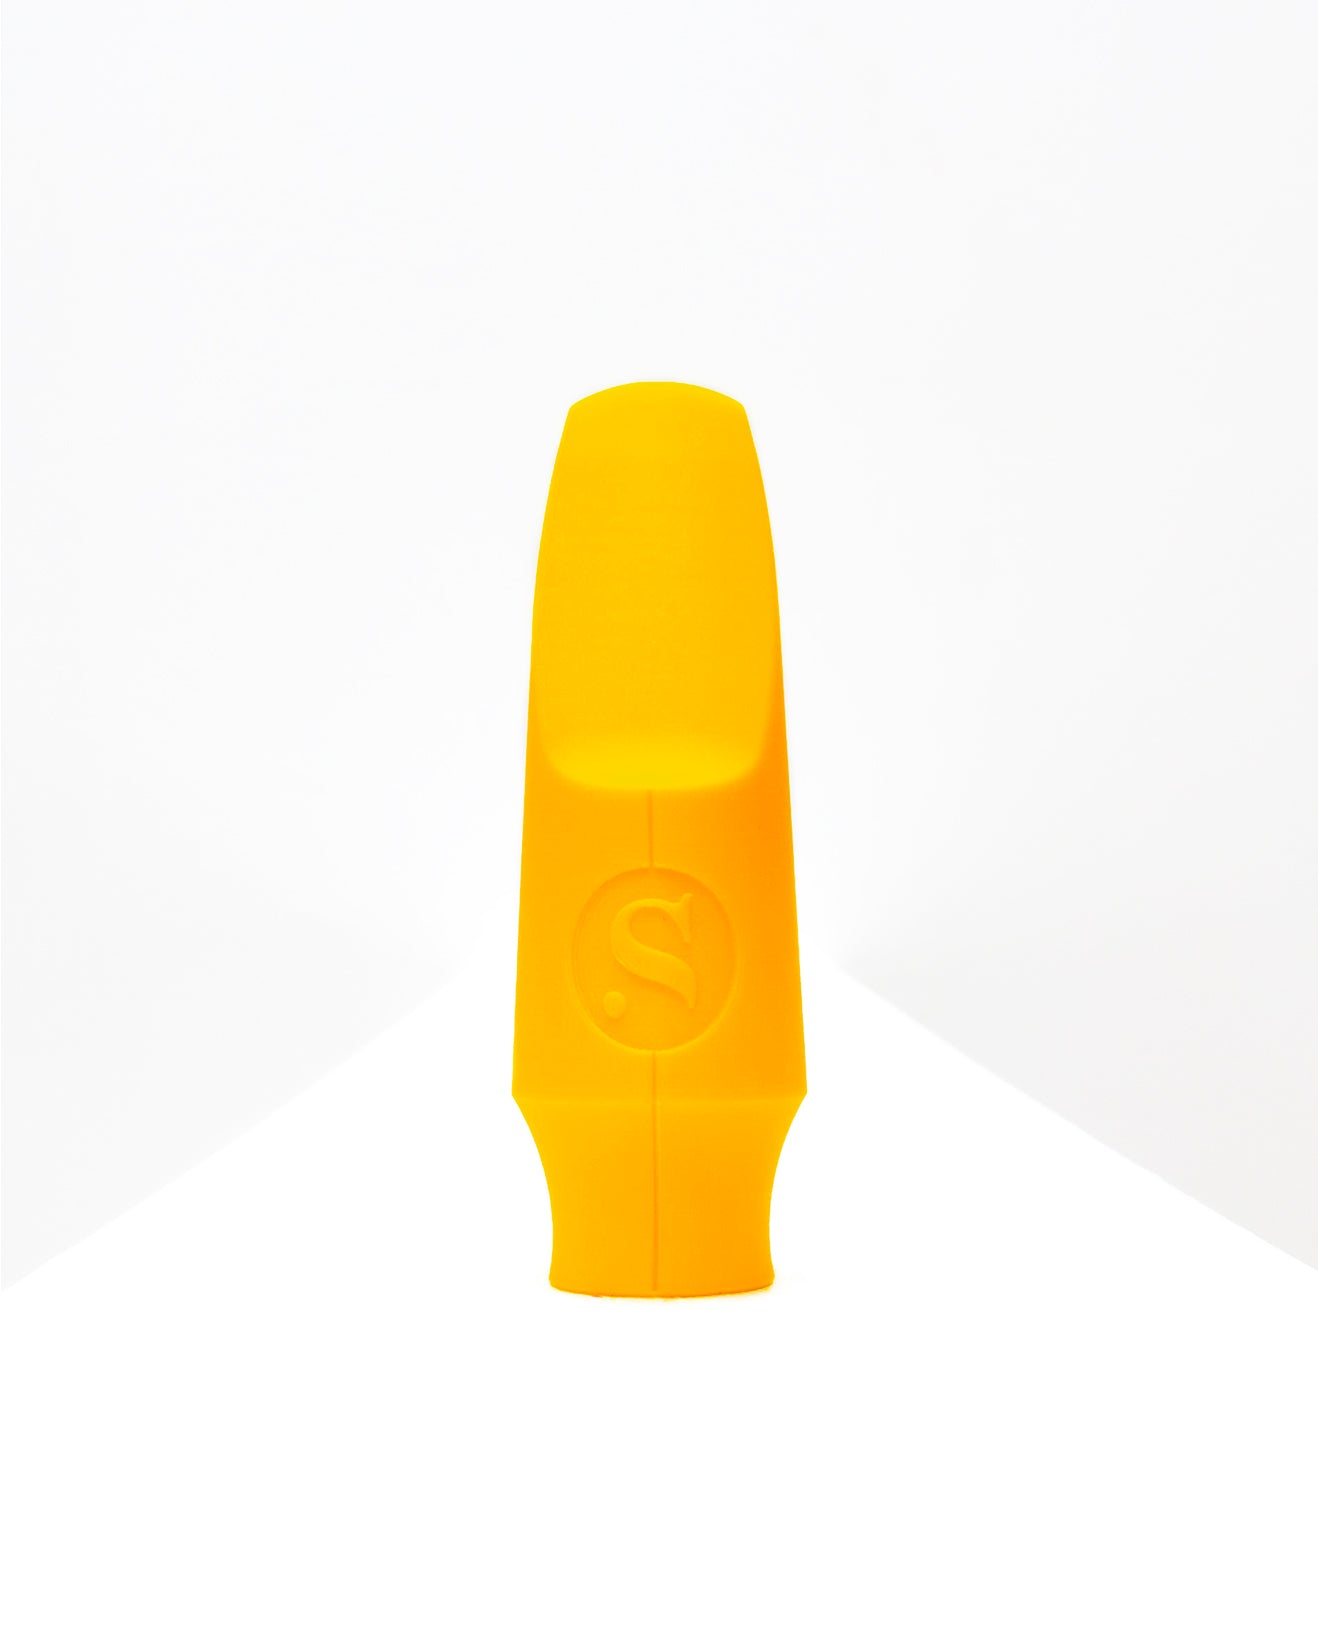 Alto Signature Saxophone mouthpiece - Parthenope by Syos - 9 / Mellow Yellow